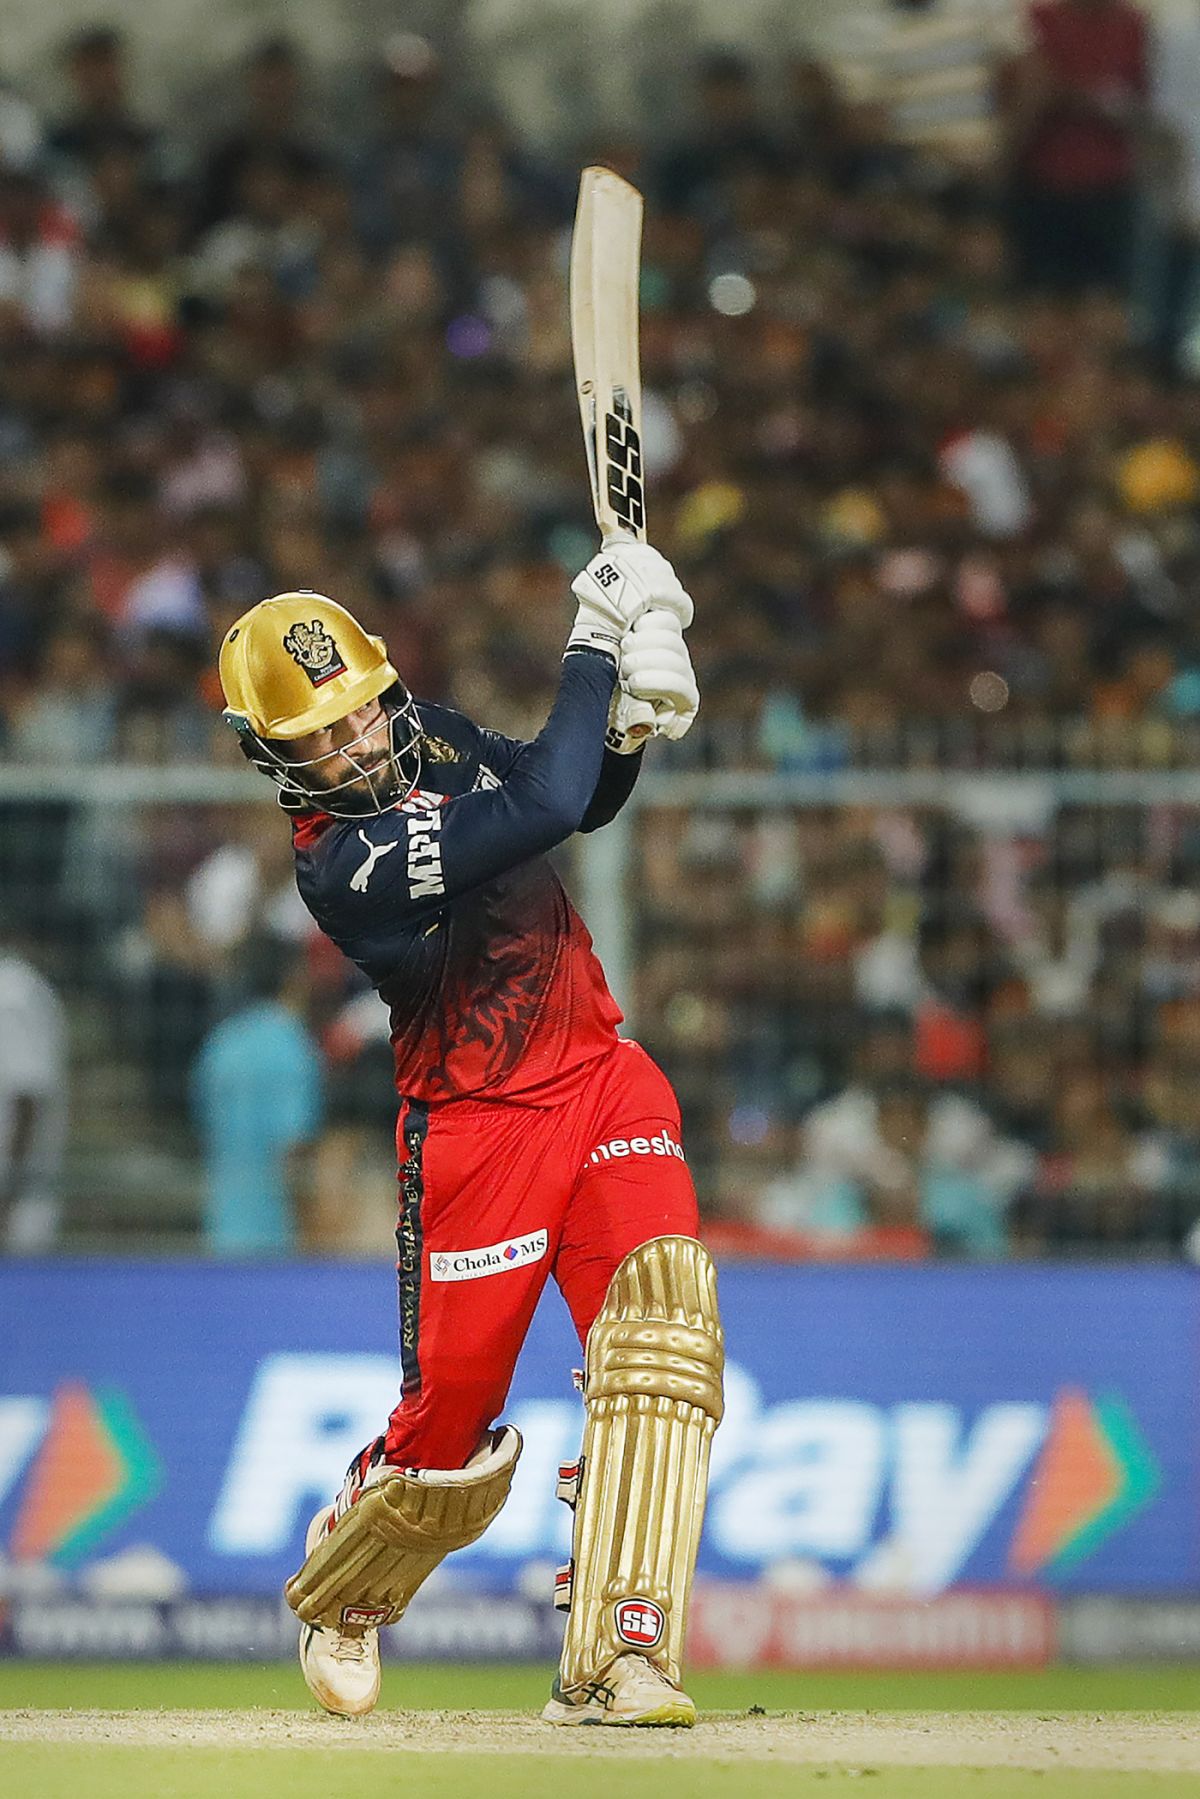 Rajat Patidar tees off on his way to 112 not out off 54, Lucknow Super Giants vs Royal Challengers Bangalore, IPL 2022, Eliminator, Kolkata, May 25, 2022